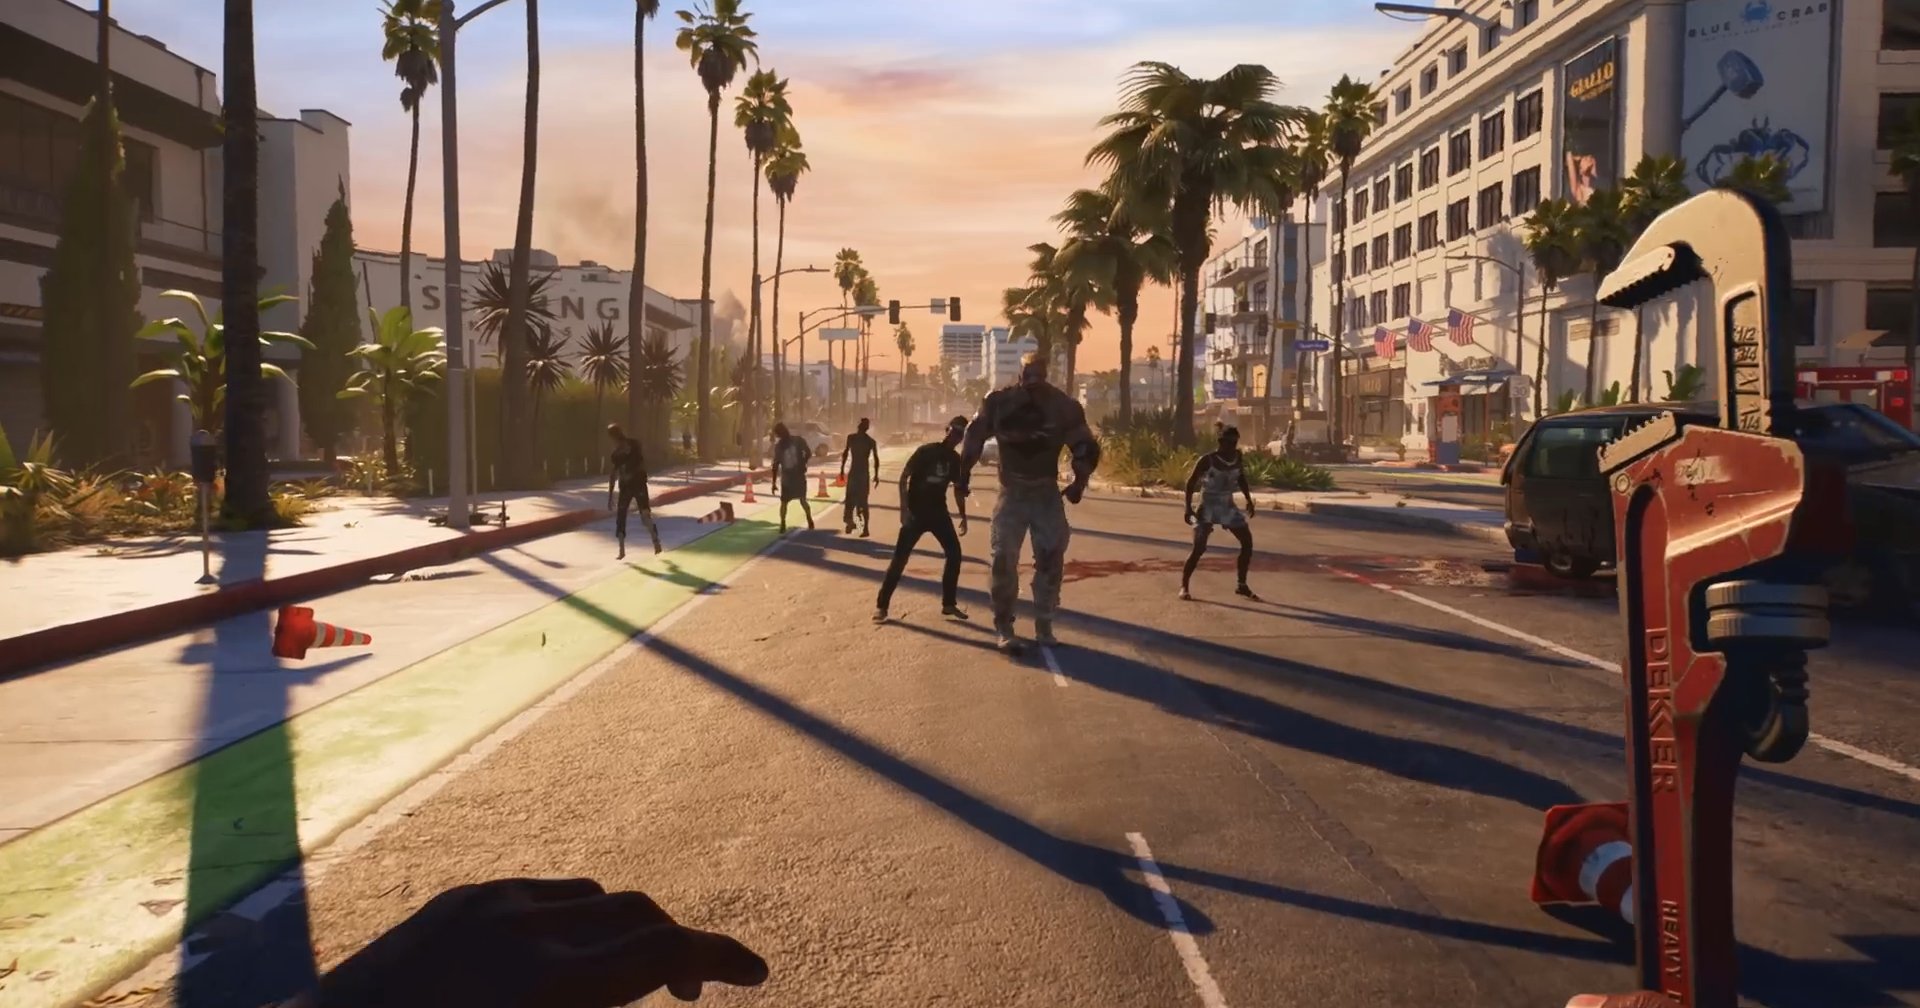 Enjoy the Unreal Engine 5 power of the new zombie games in 2023 and 2024. Here we see the undead in Dead Island 2 on the street.